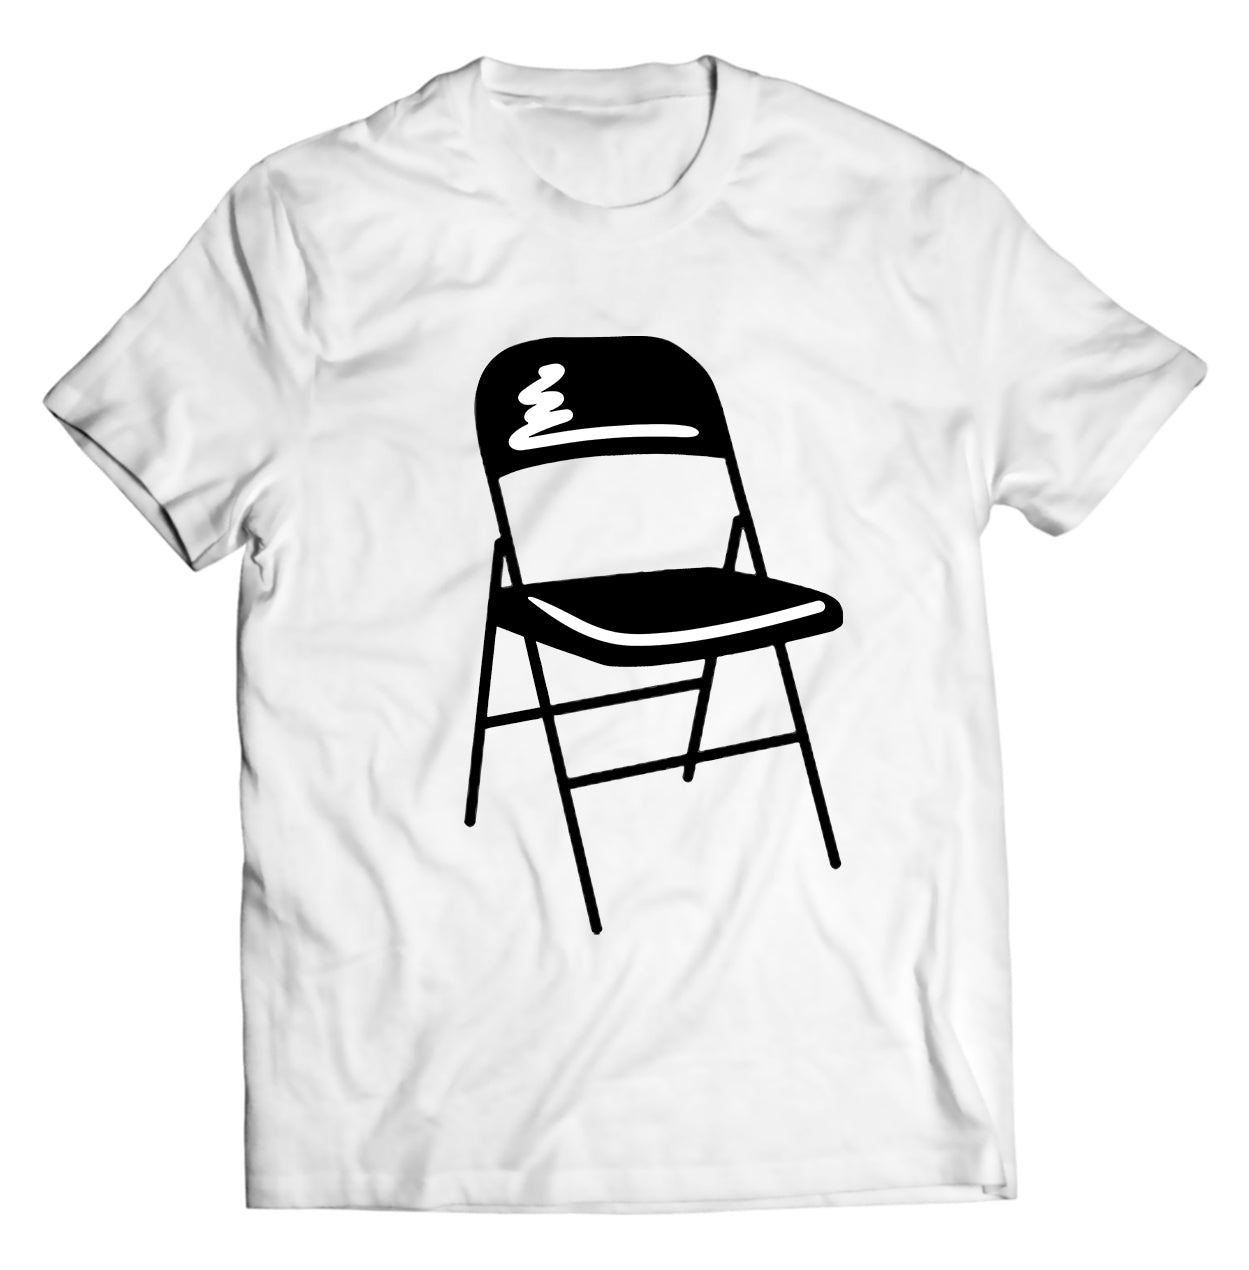 Catch Me Outside, How 'Bout Dat? Montgomery Riverfront Brawl Shirt - Montgomery Chair Shirt - Direct To Garment Quality Print - Unisex Shirt - Gift For Him or Her